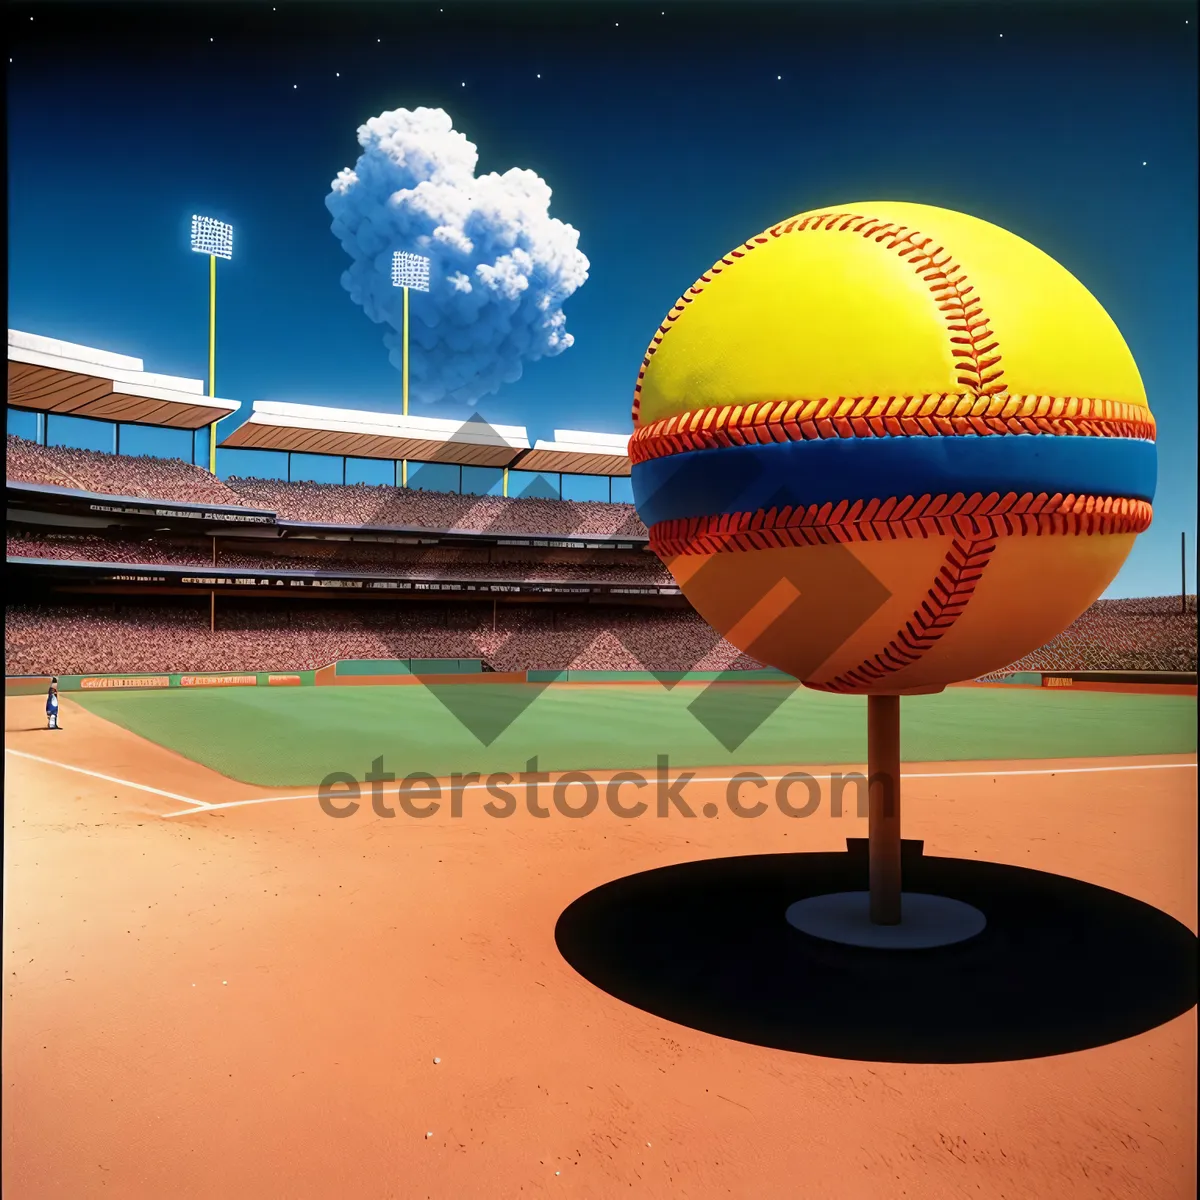 Picture of Baseball Glove on Grass - Sports Equipment